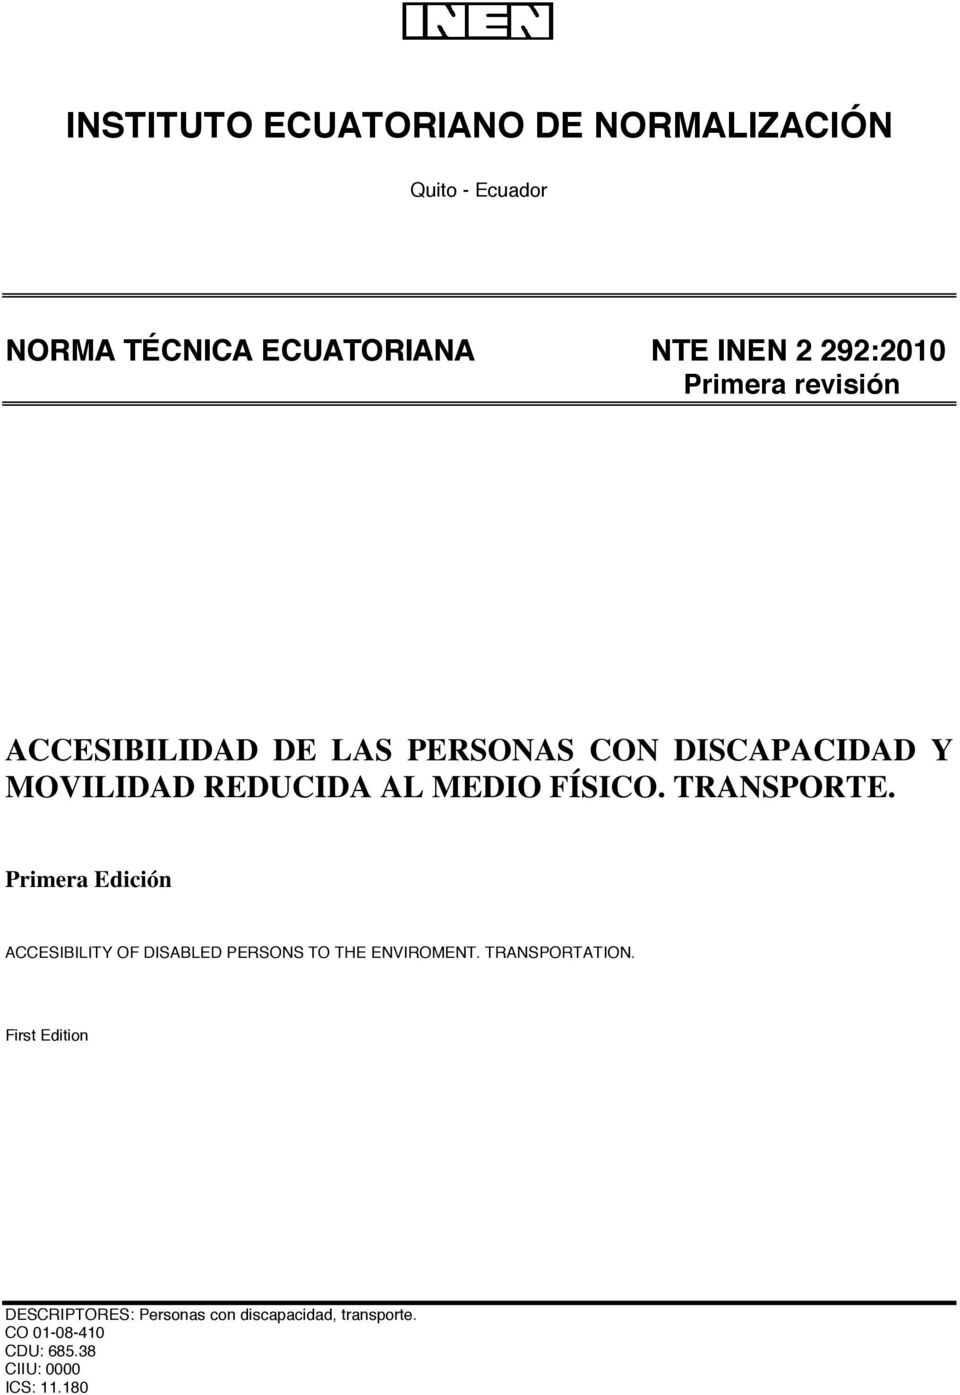 TRANSPORTE. Primera Edición ACCESIBILITY OF DISABLED PERSONS TO THE ENVIROMENT. TRANSPORTATION.